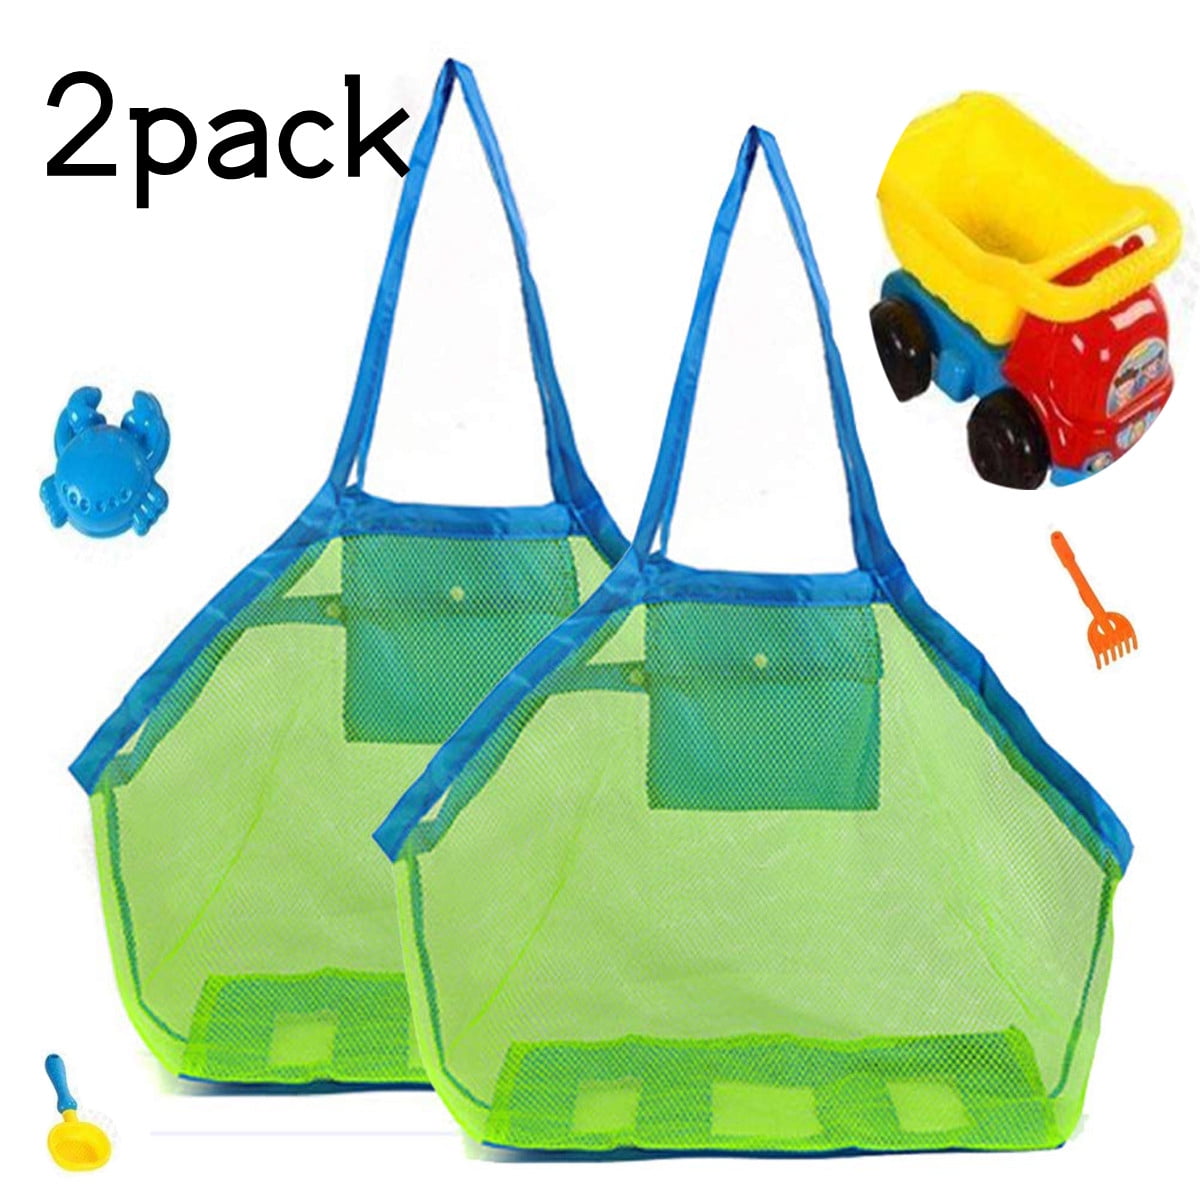 MARFOREVER 3 Pack Beach Toy Mesh Bag Kids Sand Shell Collecting Totes for Holding Shells Beach Toys Swimming Accessories Storage Bags with Adjustable Carrying Straps and Zipper for Boys and Girls 